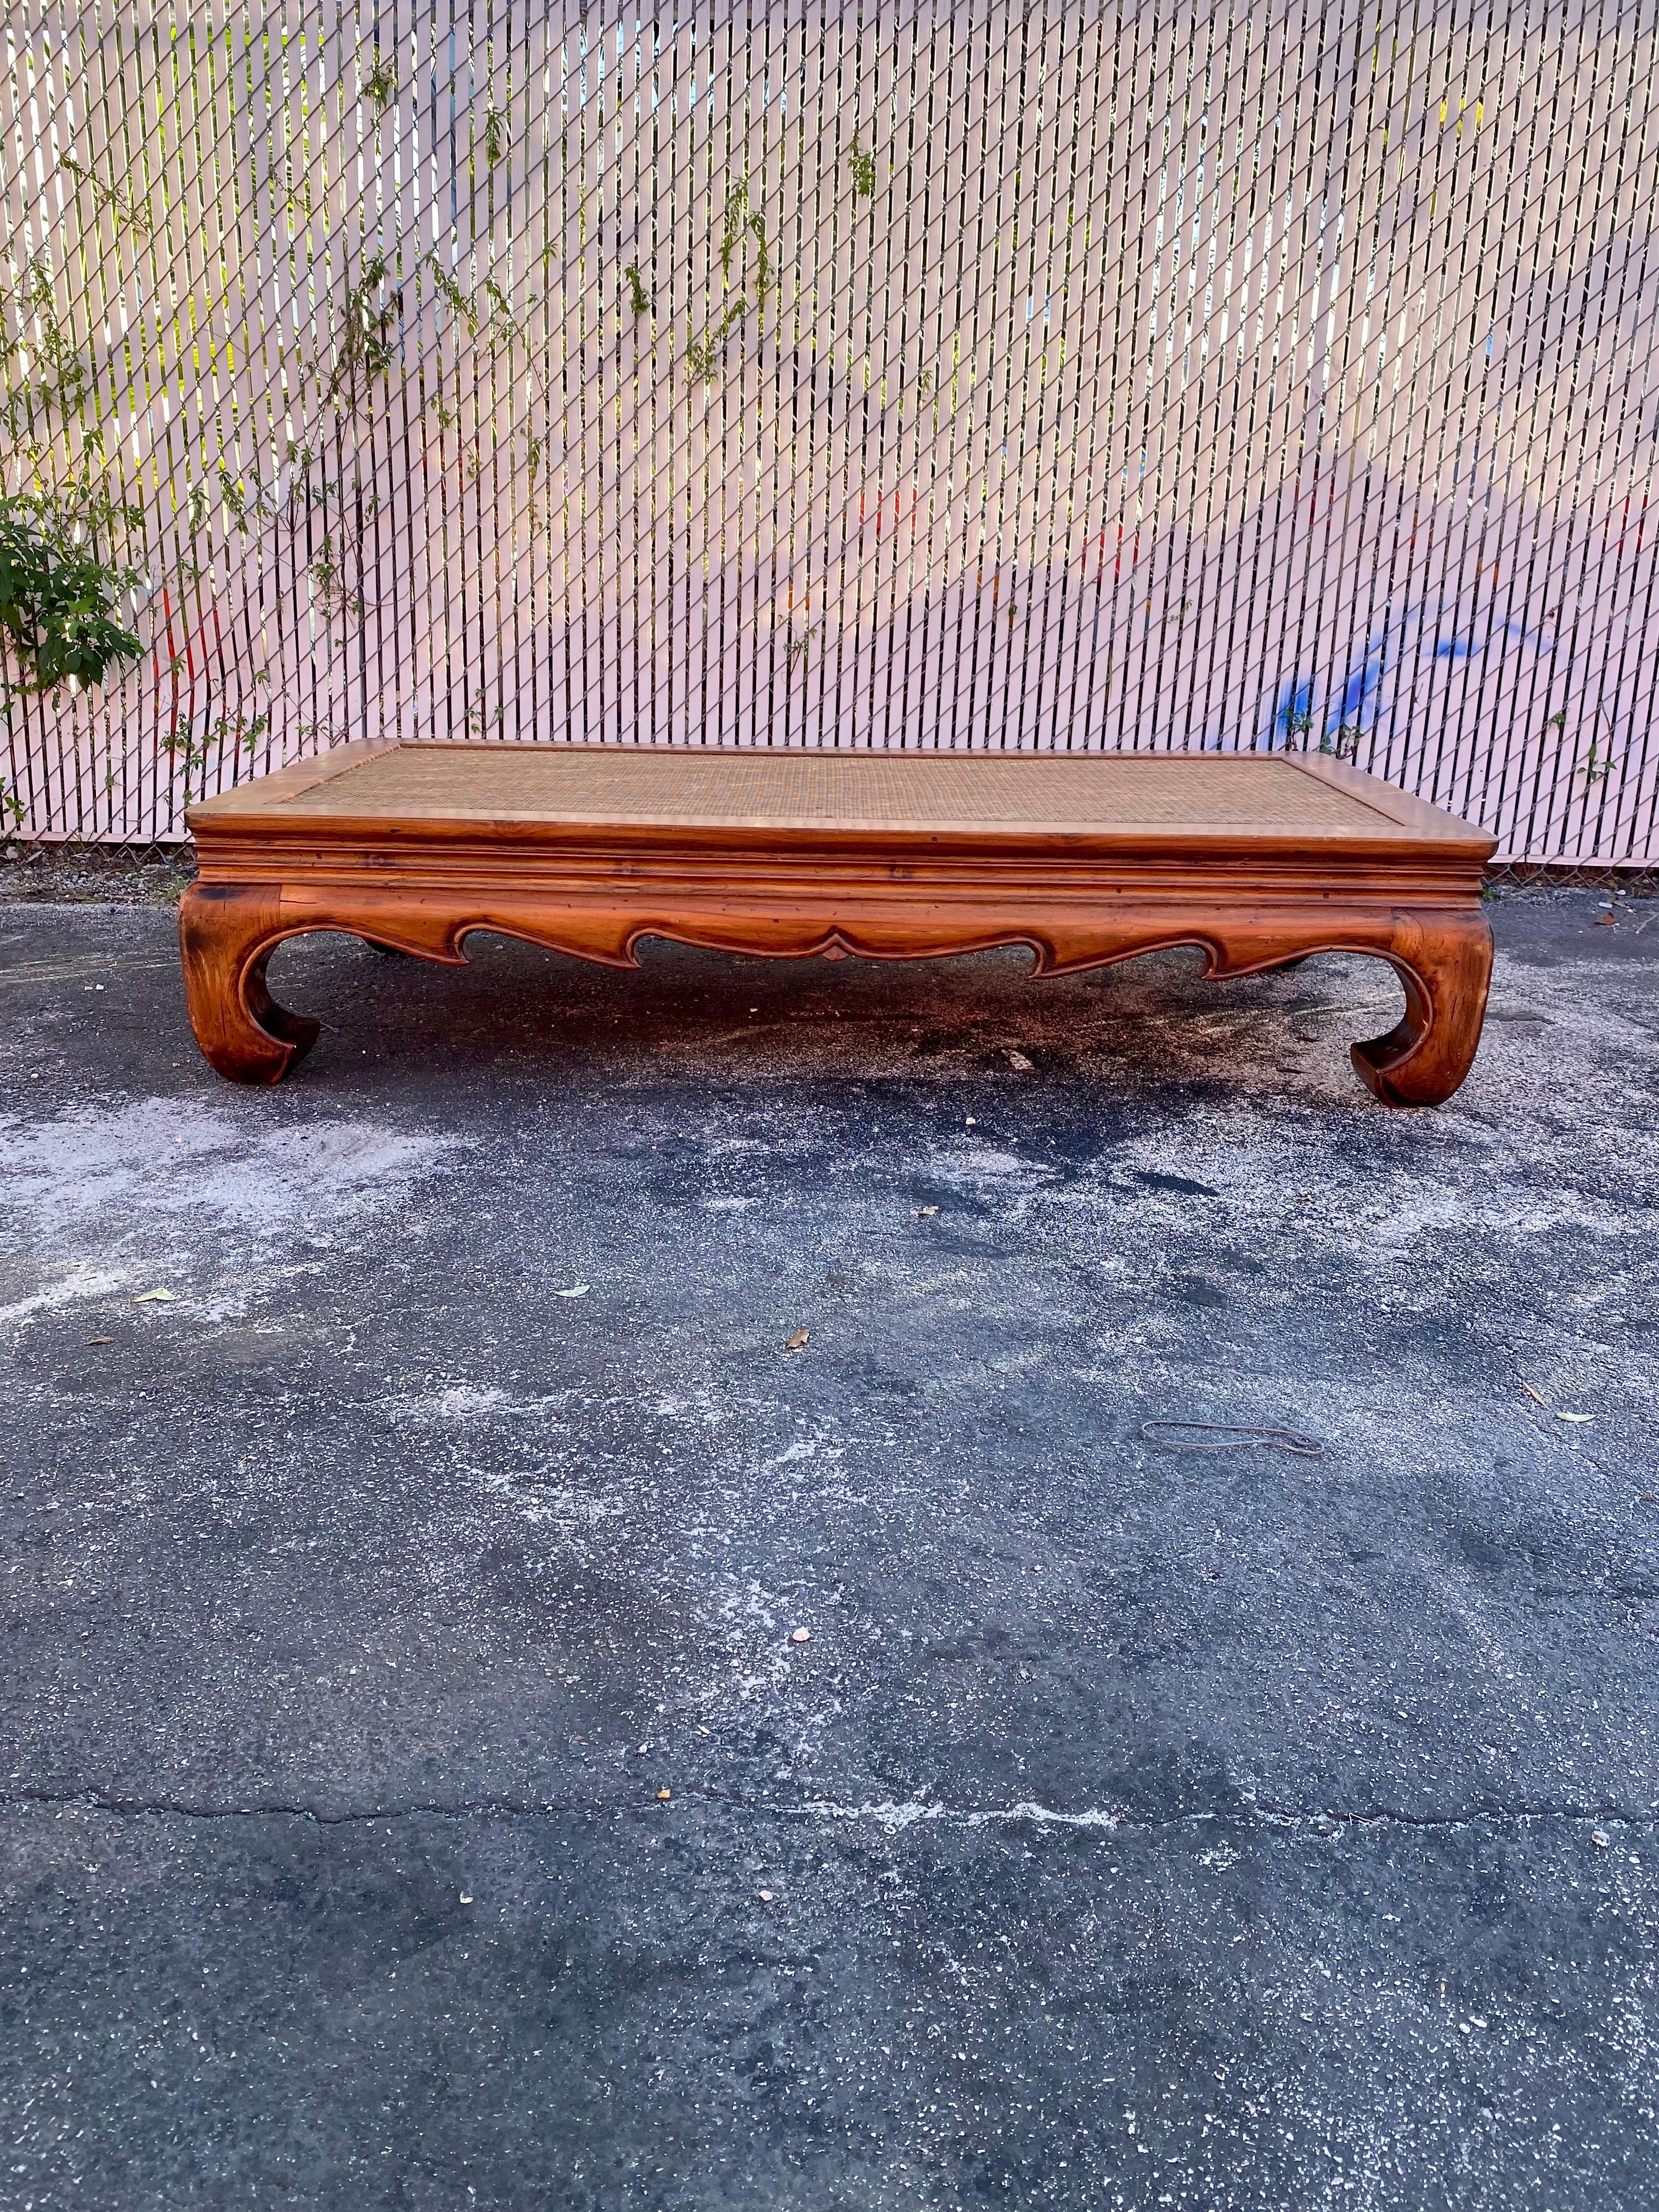 On offer on this occasion is one of the most stunnin, sculptural wood and cane top coffee table you could hope to find. This is an ultra-rare opportunity to acquire what is, unequivocally, the best of the best, it being a most spectacular and